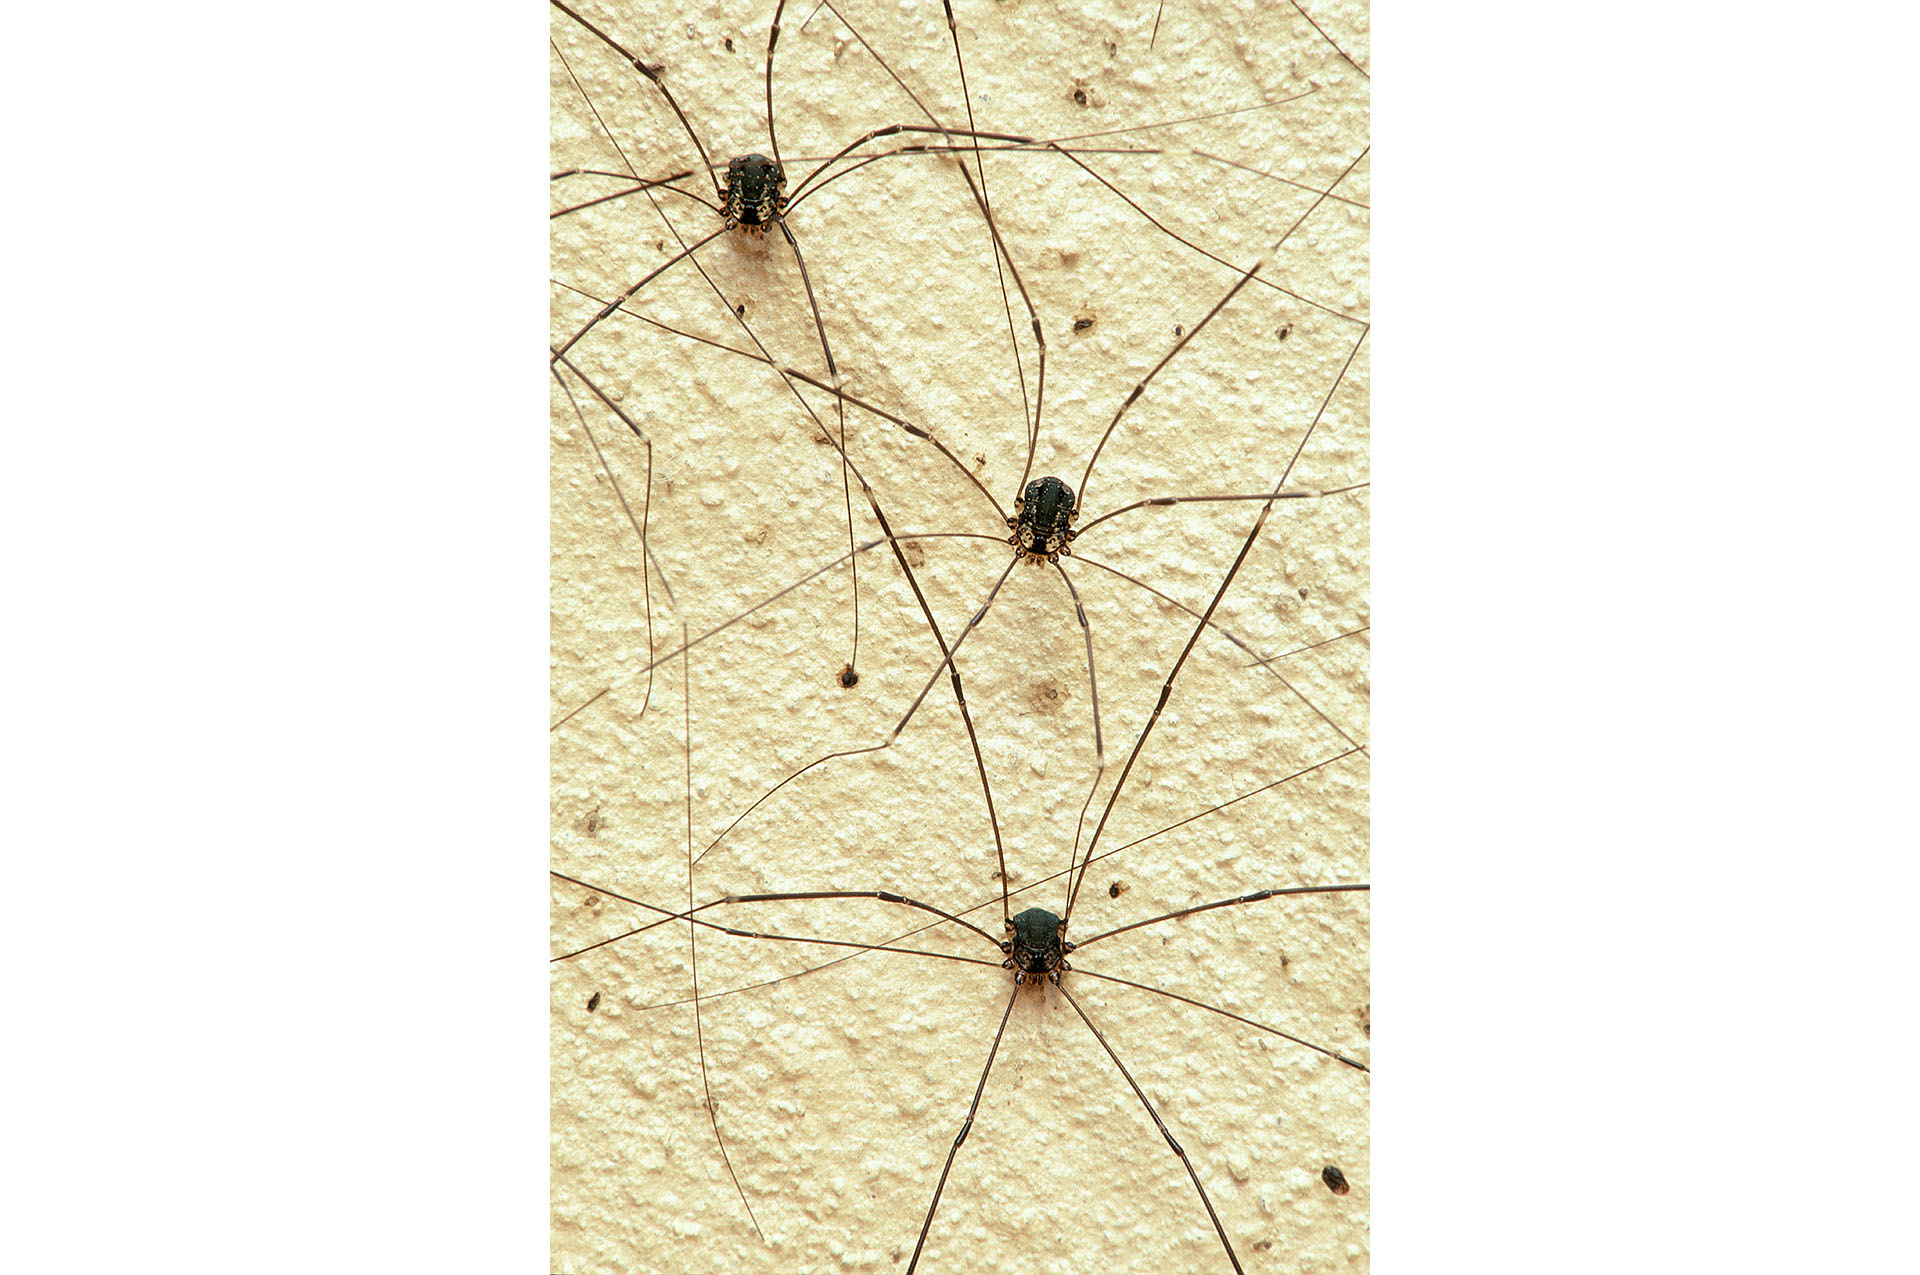 Three harvestman spiders on a wall